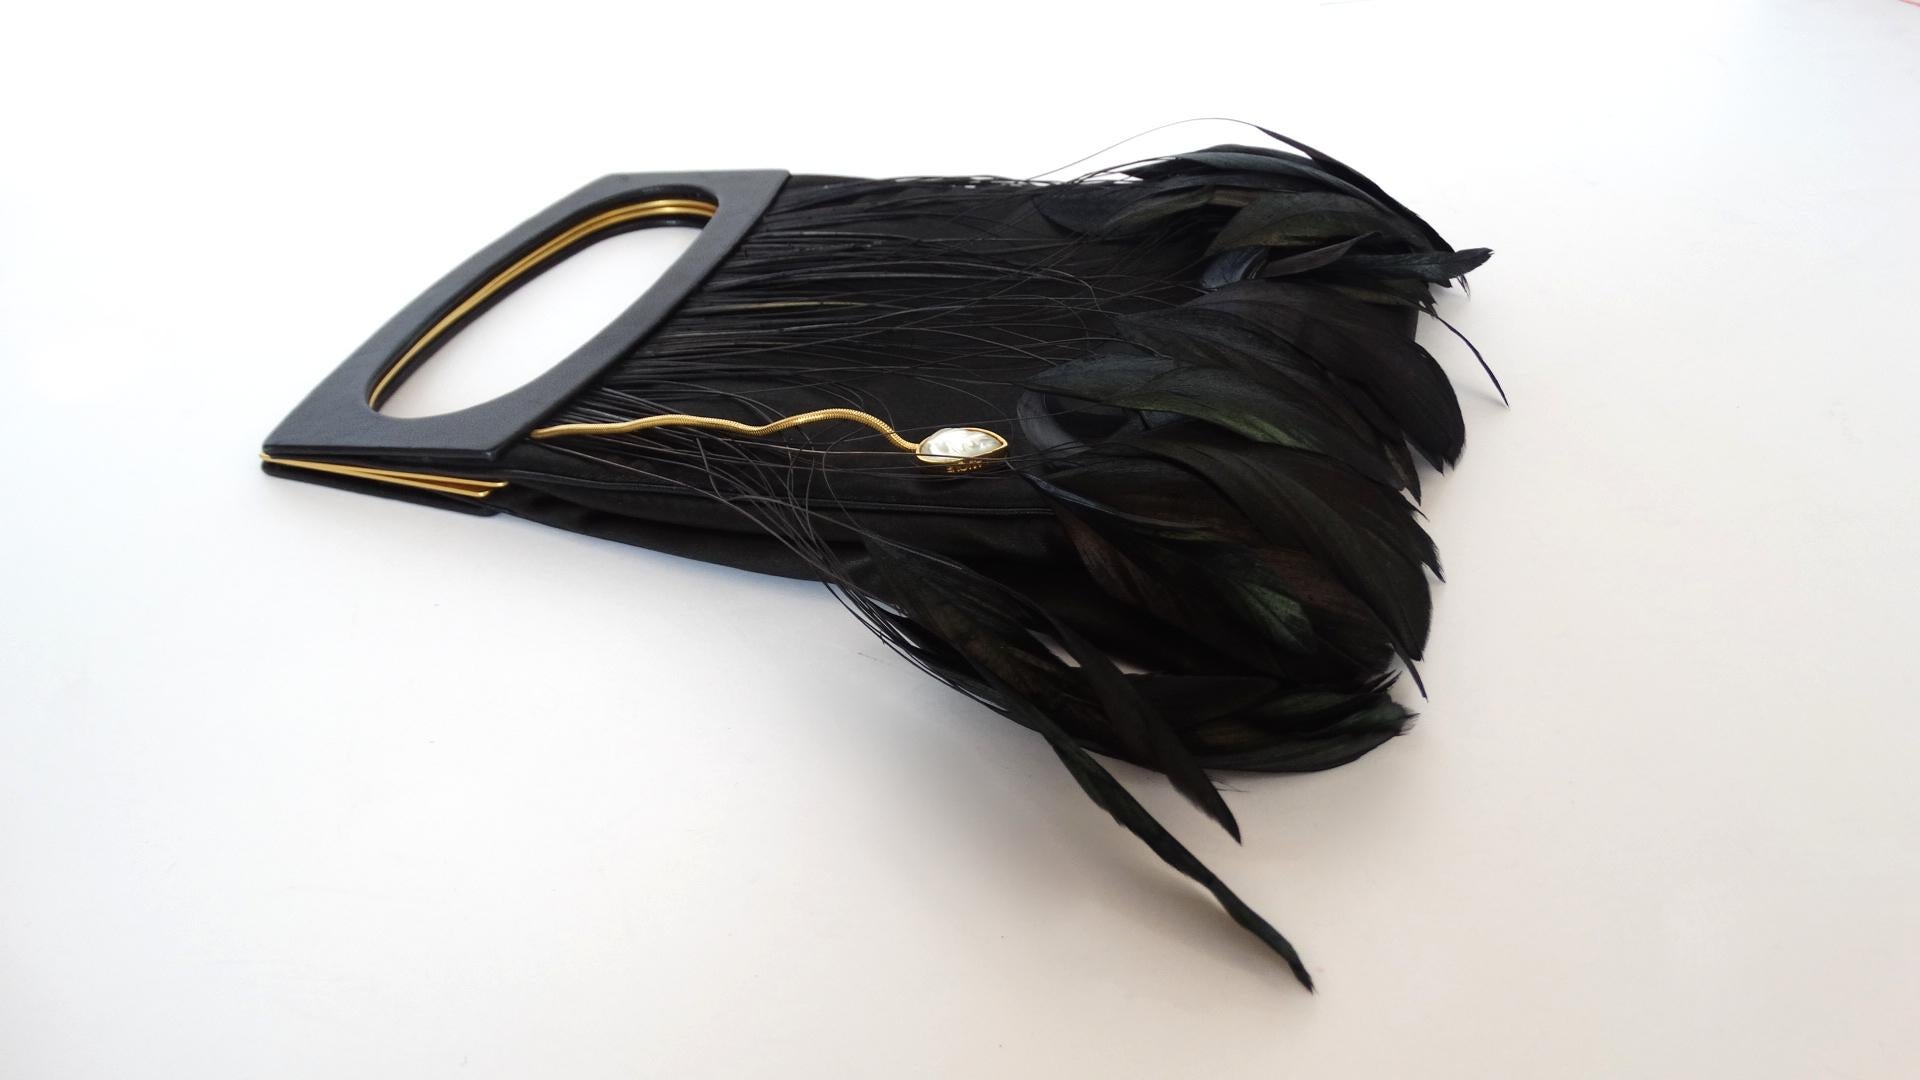 The Most Gorgeous and Elegant Evening Bag Is Waiting For You! Designed by Lalique, the ultimate French luxury designer, this black silk evening bag features gold-tone hardware and flat leather magnetic handles. The front face of the bag is decorated